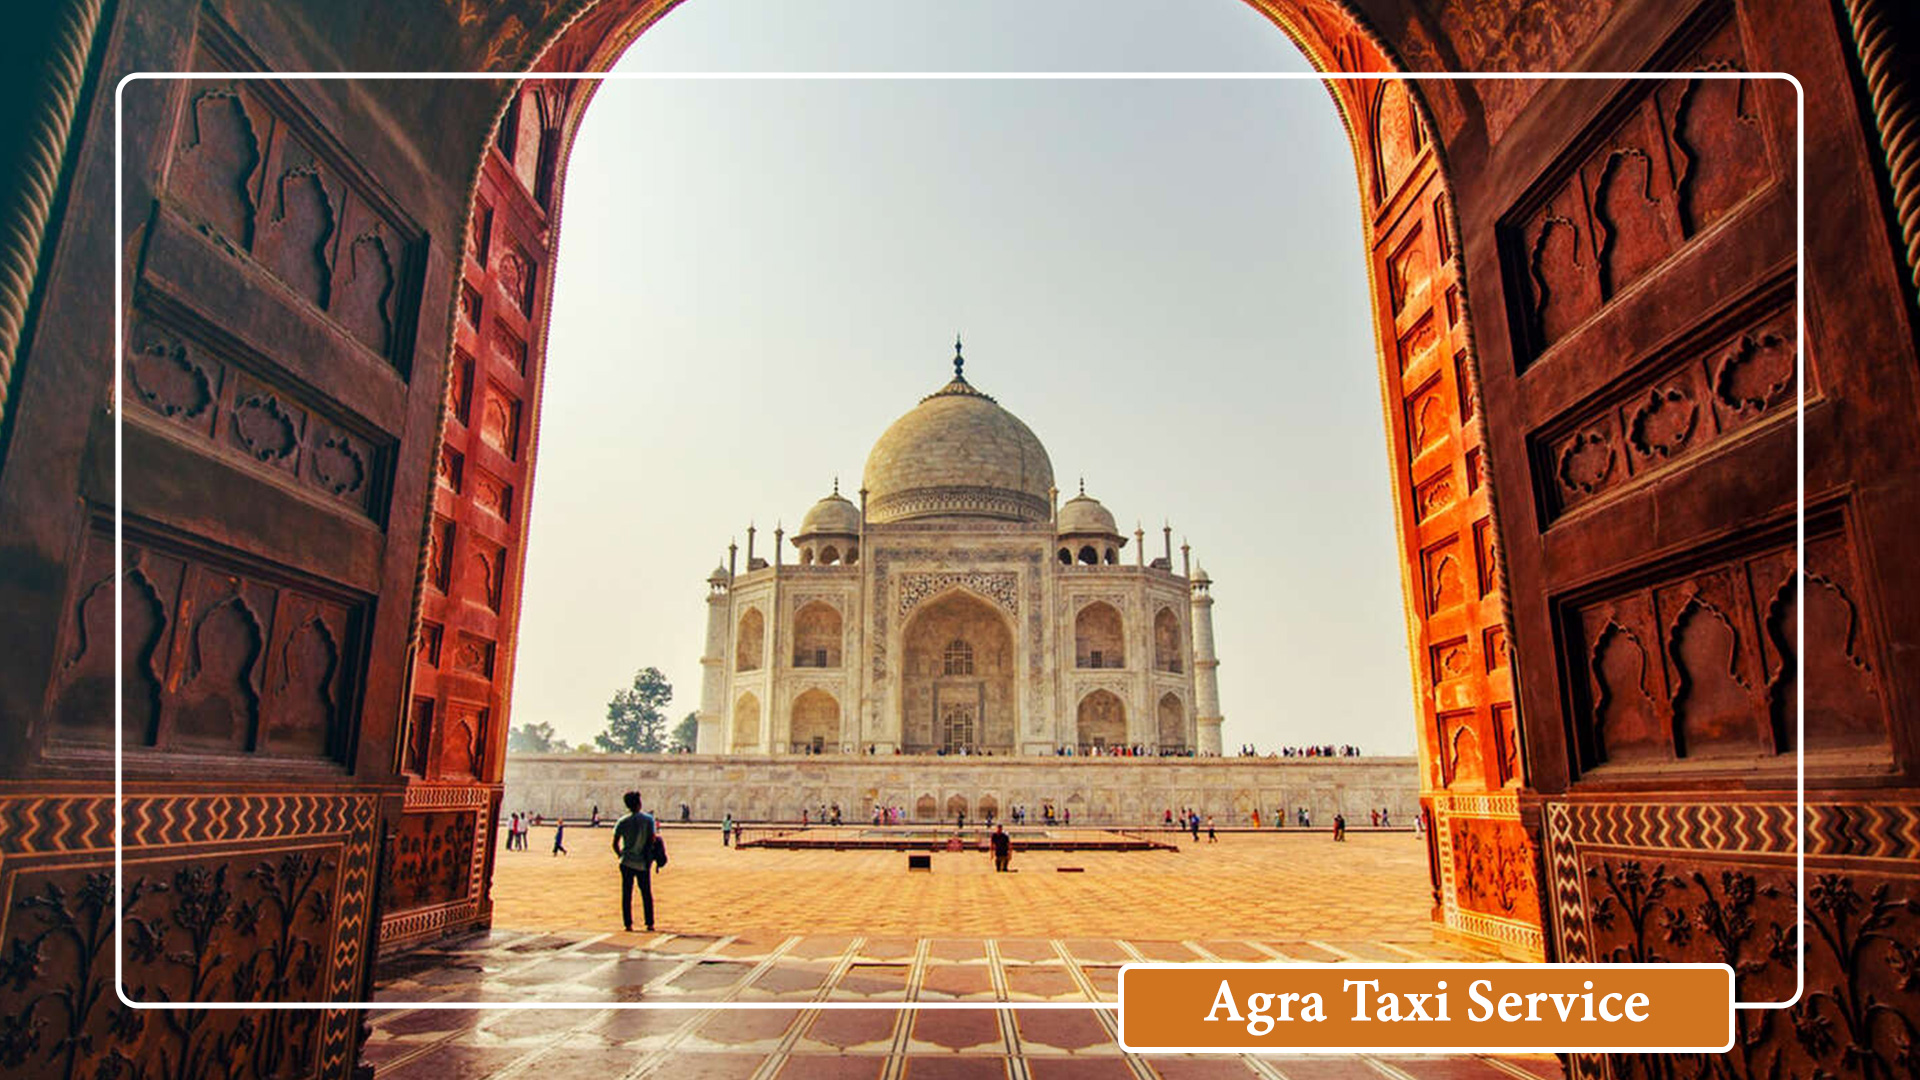 It depicts Jaipur to Agra taxi service with beautiful image of Taj Mahal in Agra